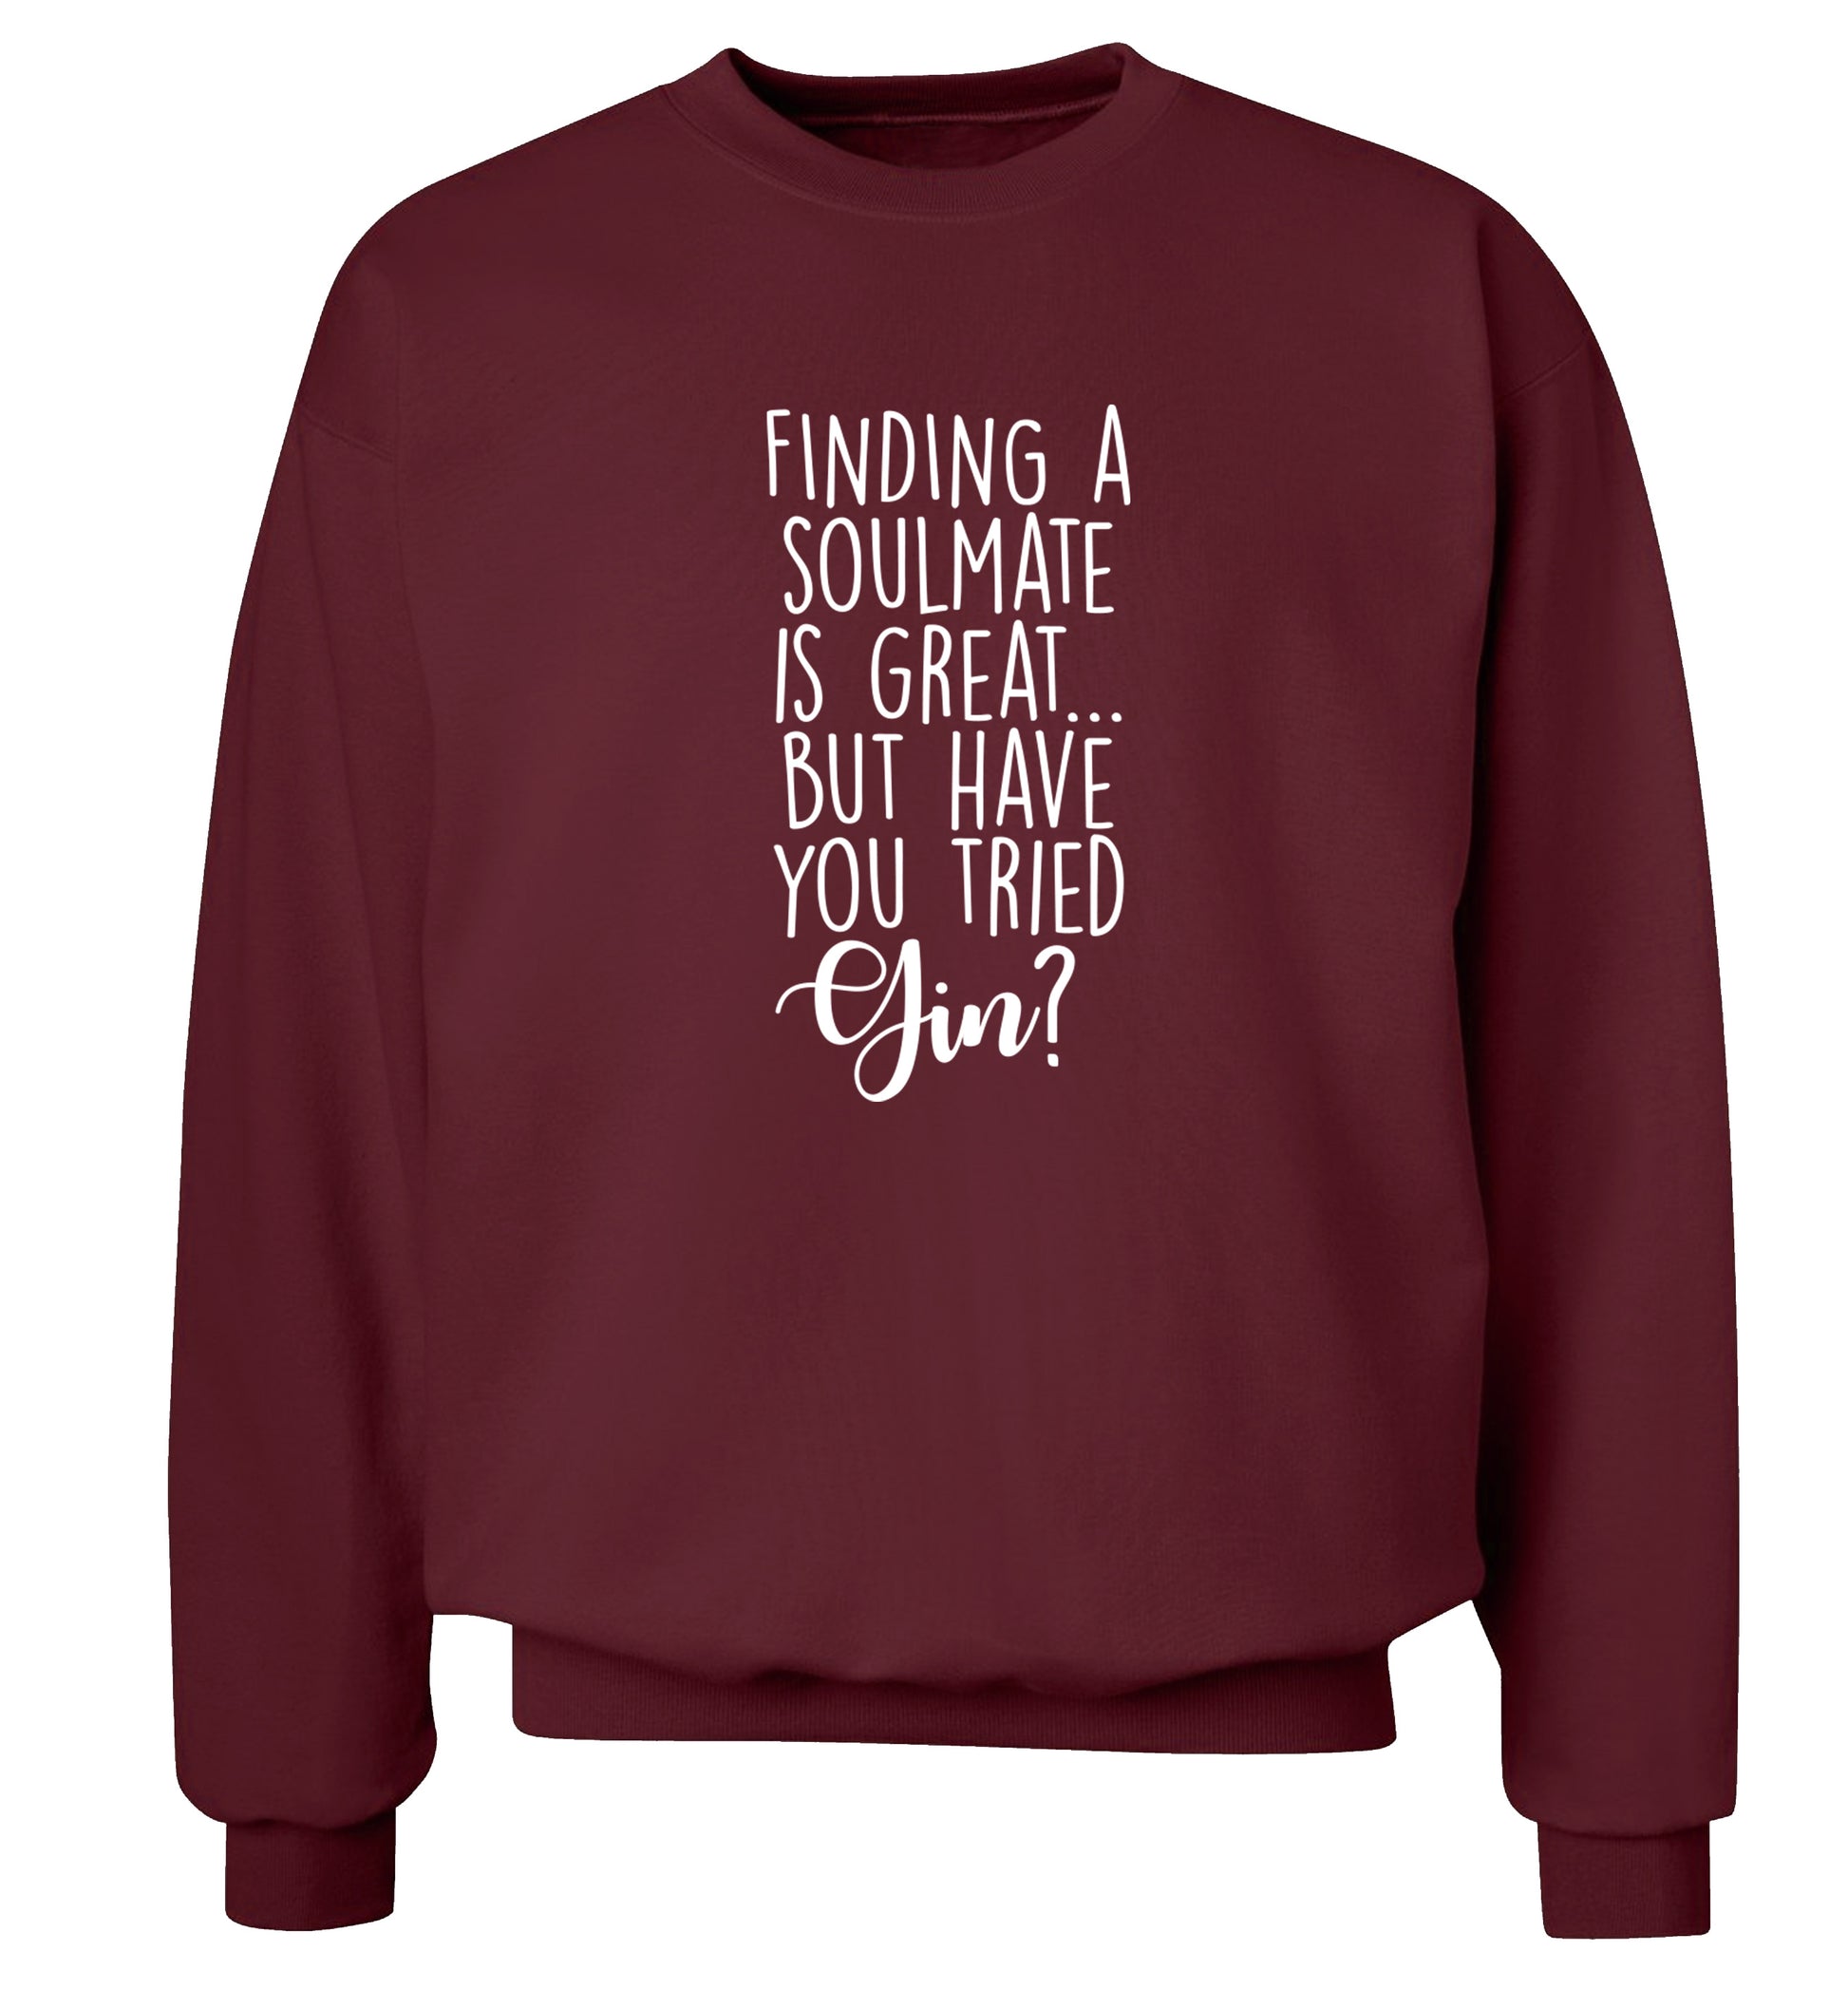 Finding a soulmate is great but have you tried gin? Adult's unisex maroon Sweater 2XL